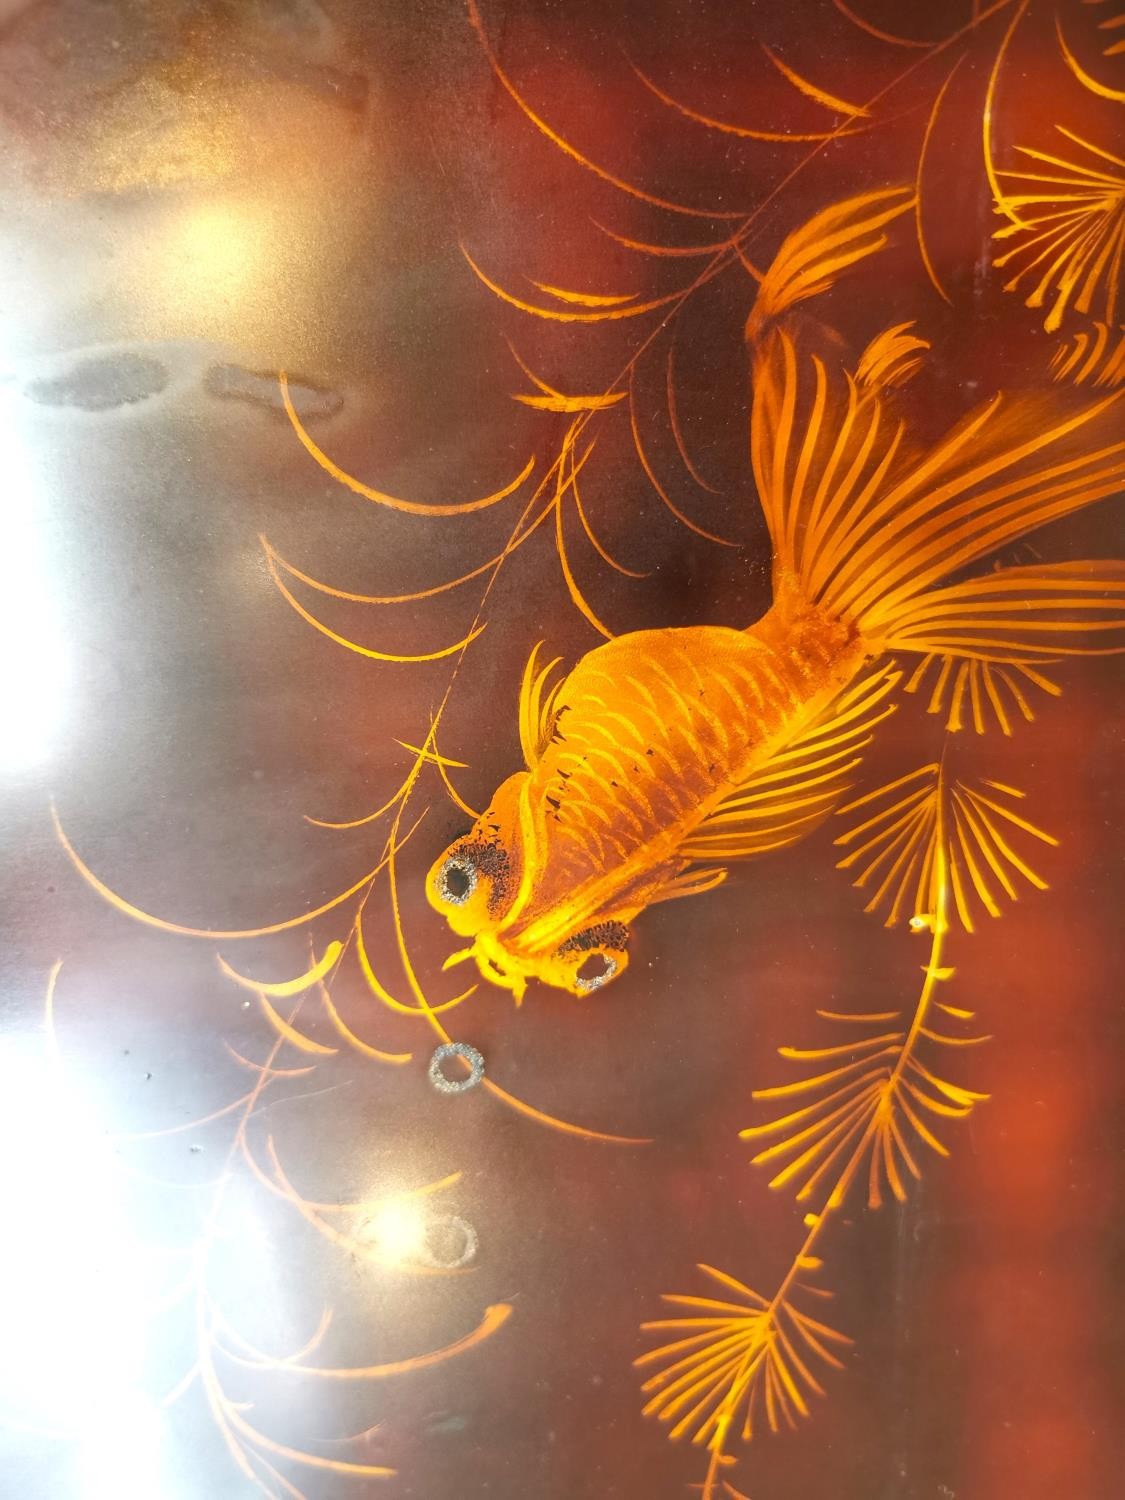 A 20th century Chinese lacquered wooden panel depicting carp and fantail gold fish among water - Image 5 of 6